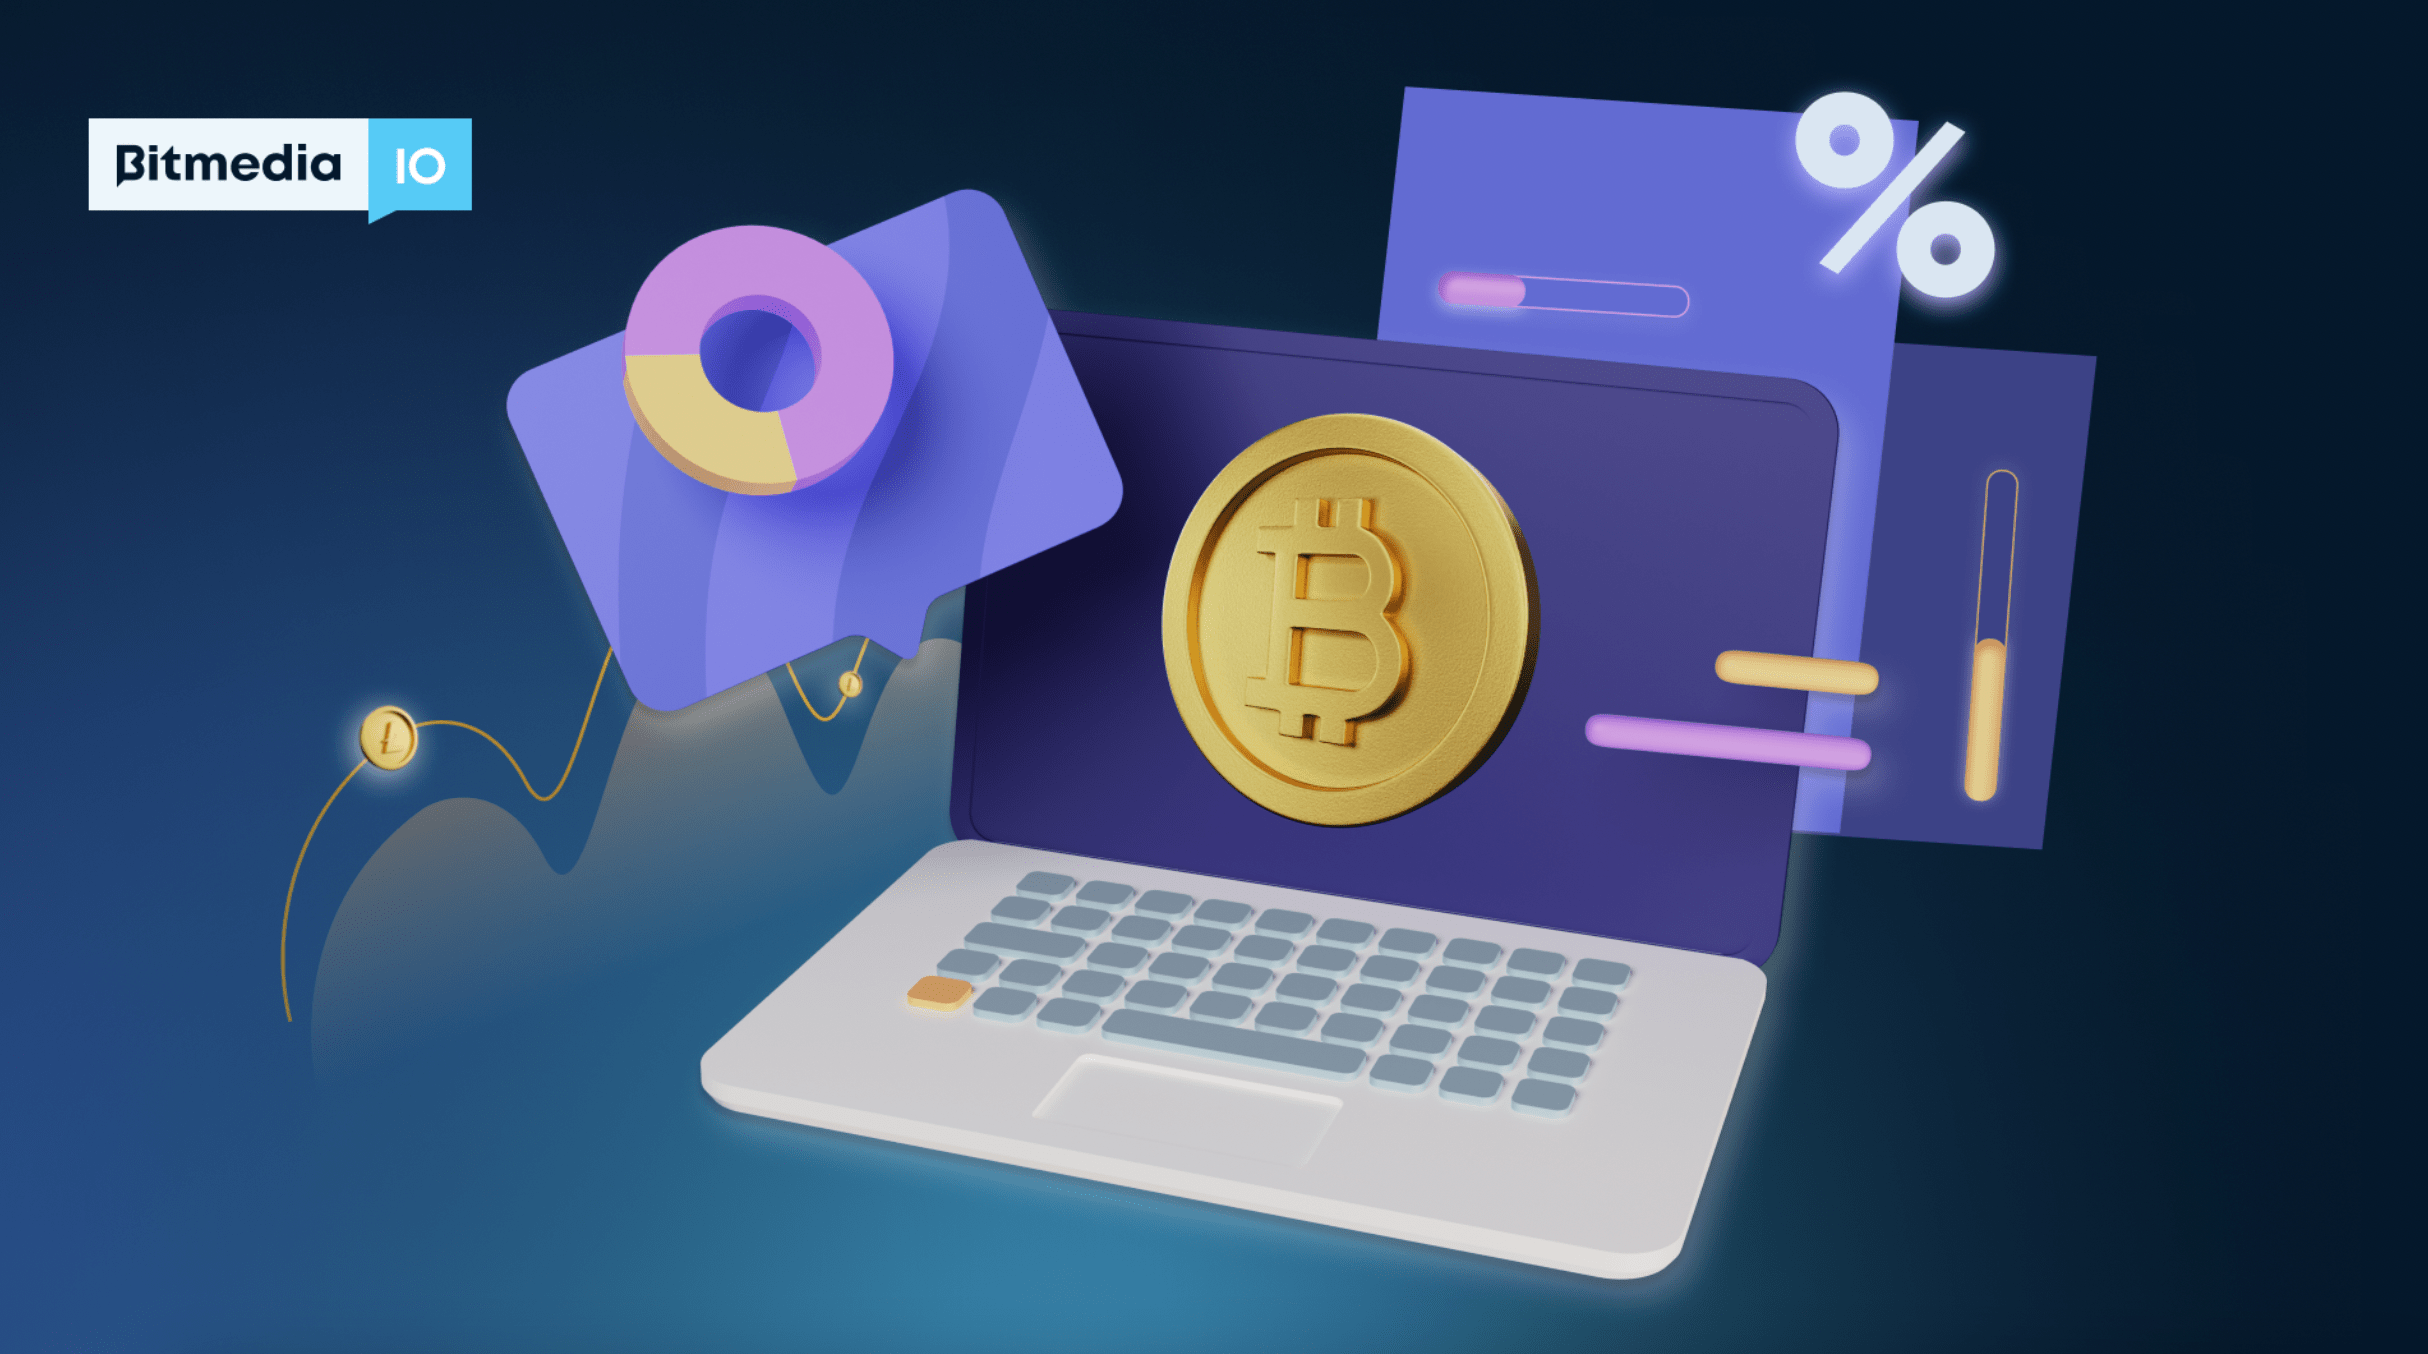 How Crypto Is Reshaping the Online Advertising Business Model